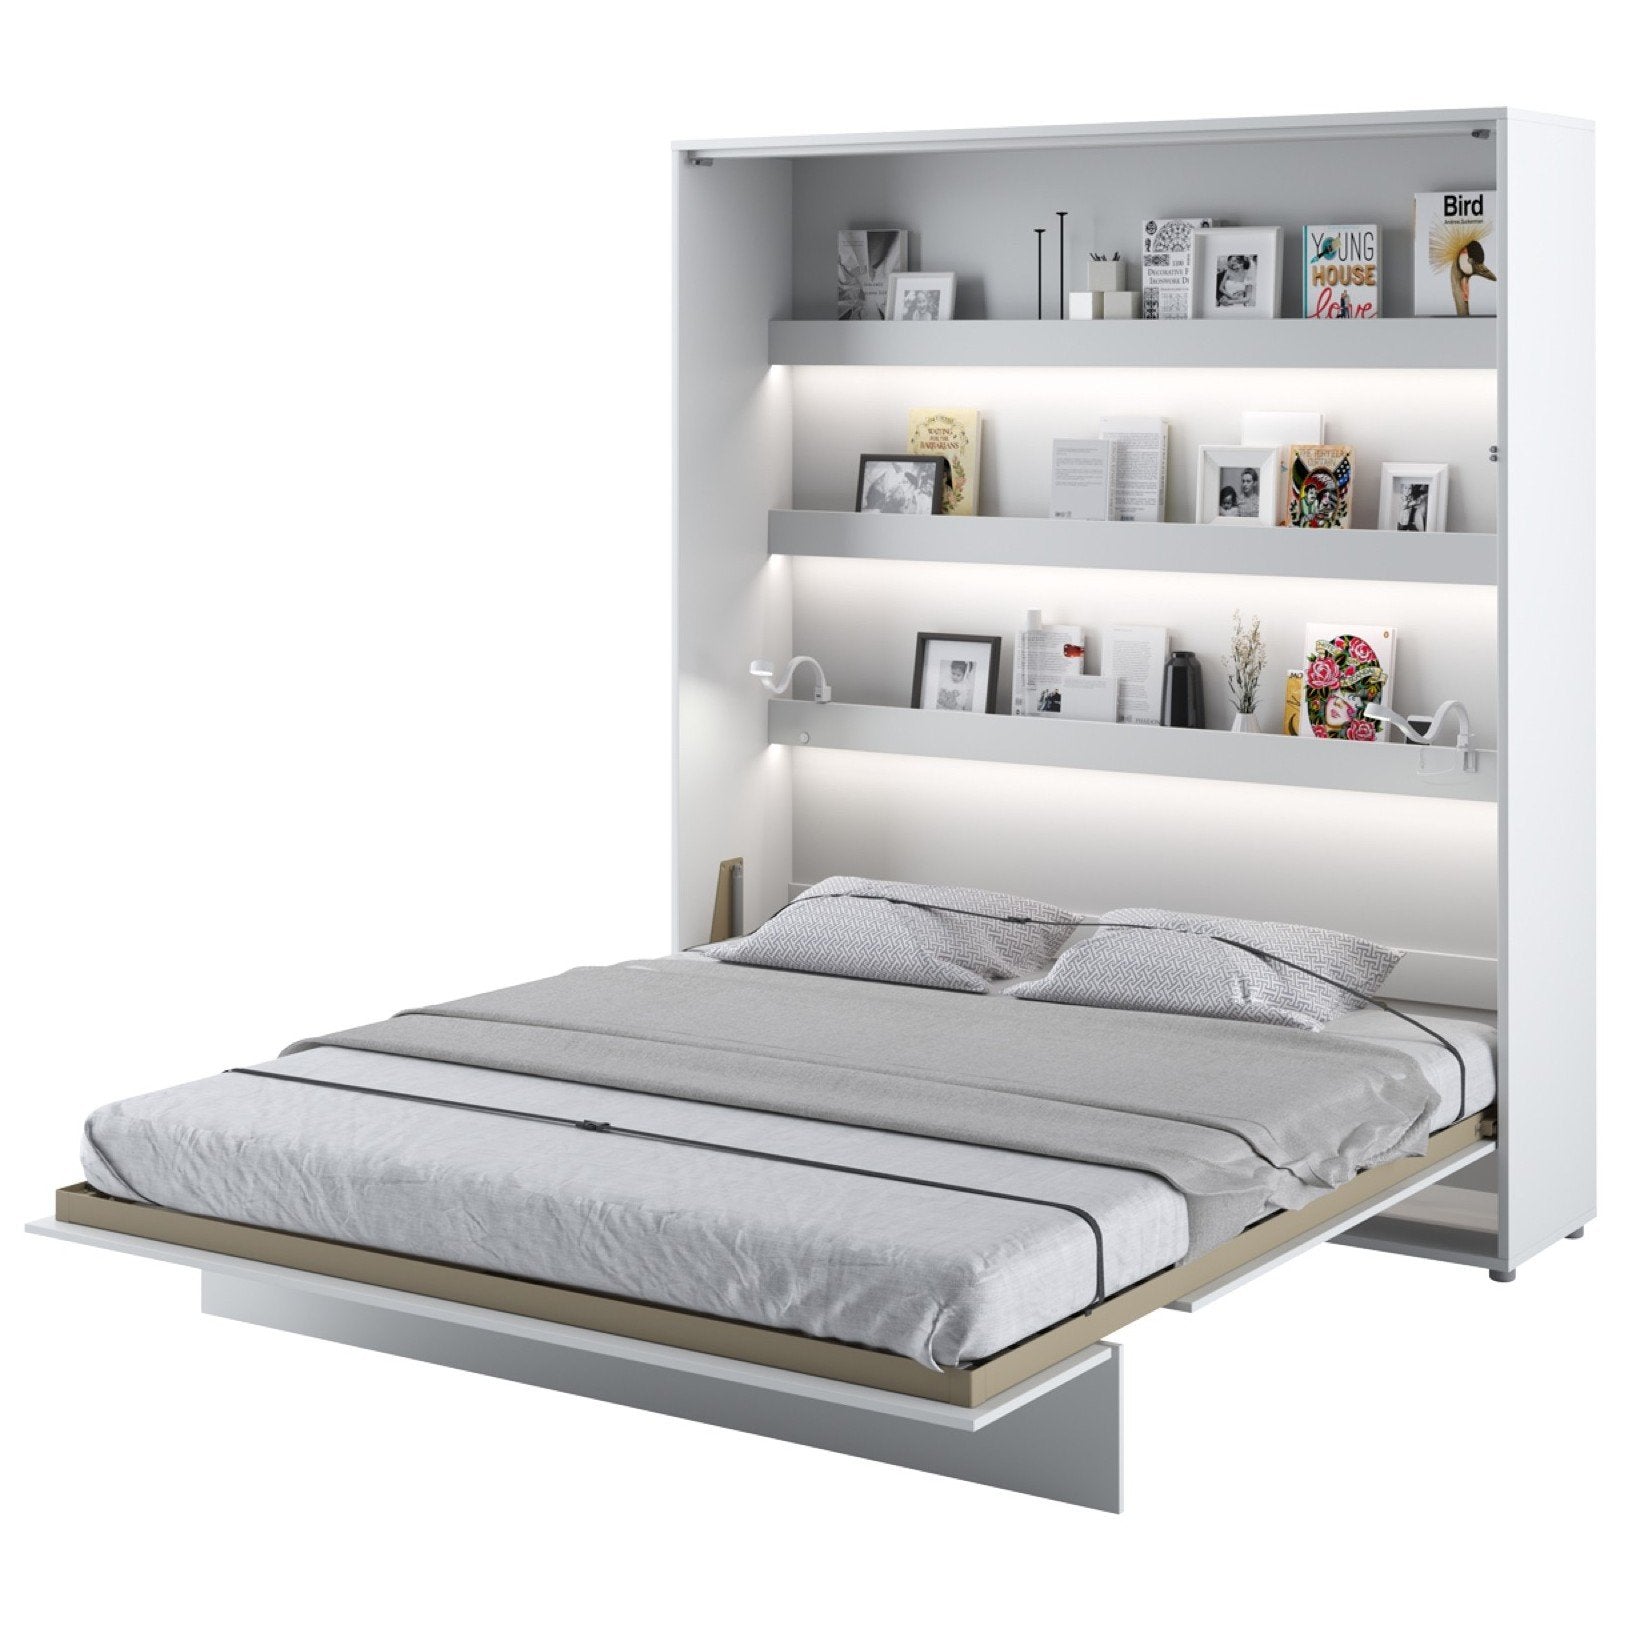 BC-13 Vertical Wall Bed Concept 180cm-Wall Bed